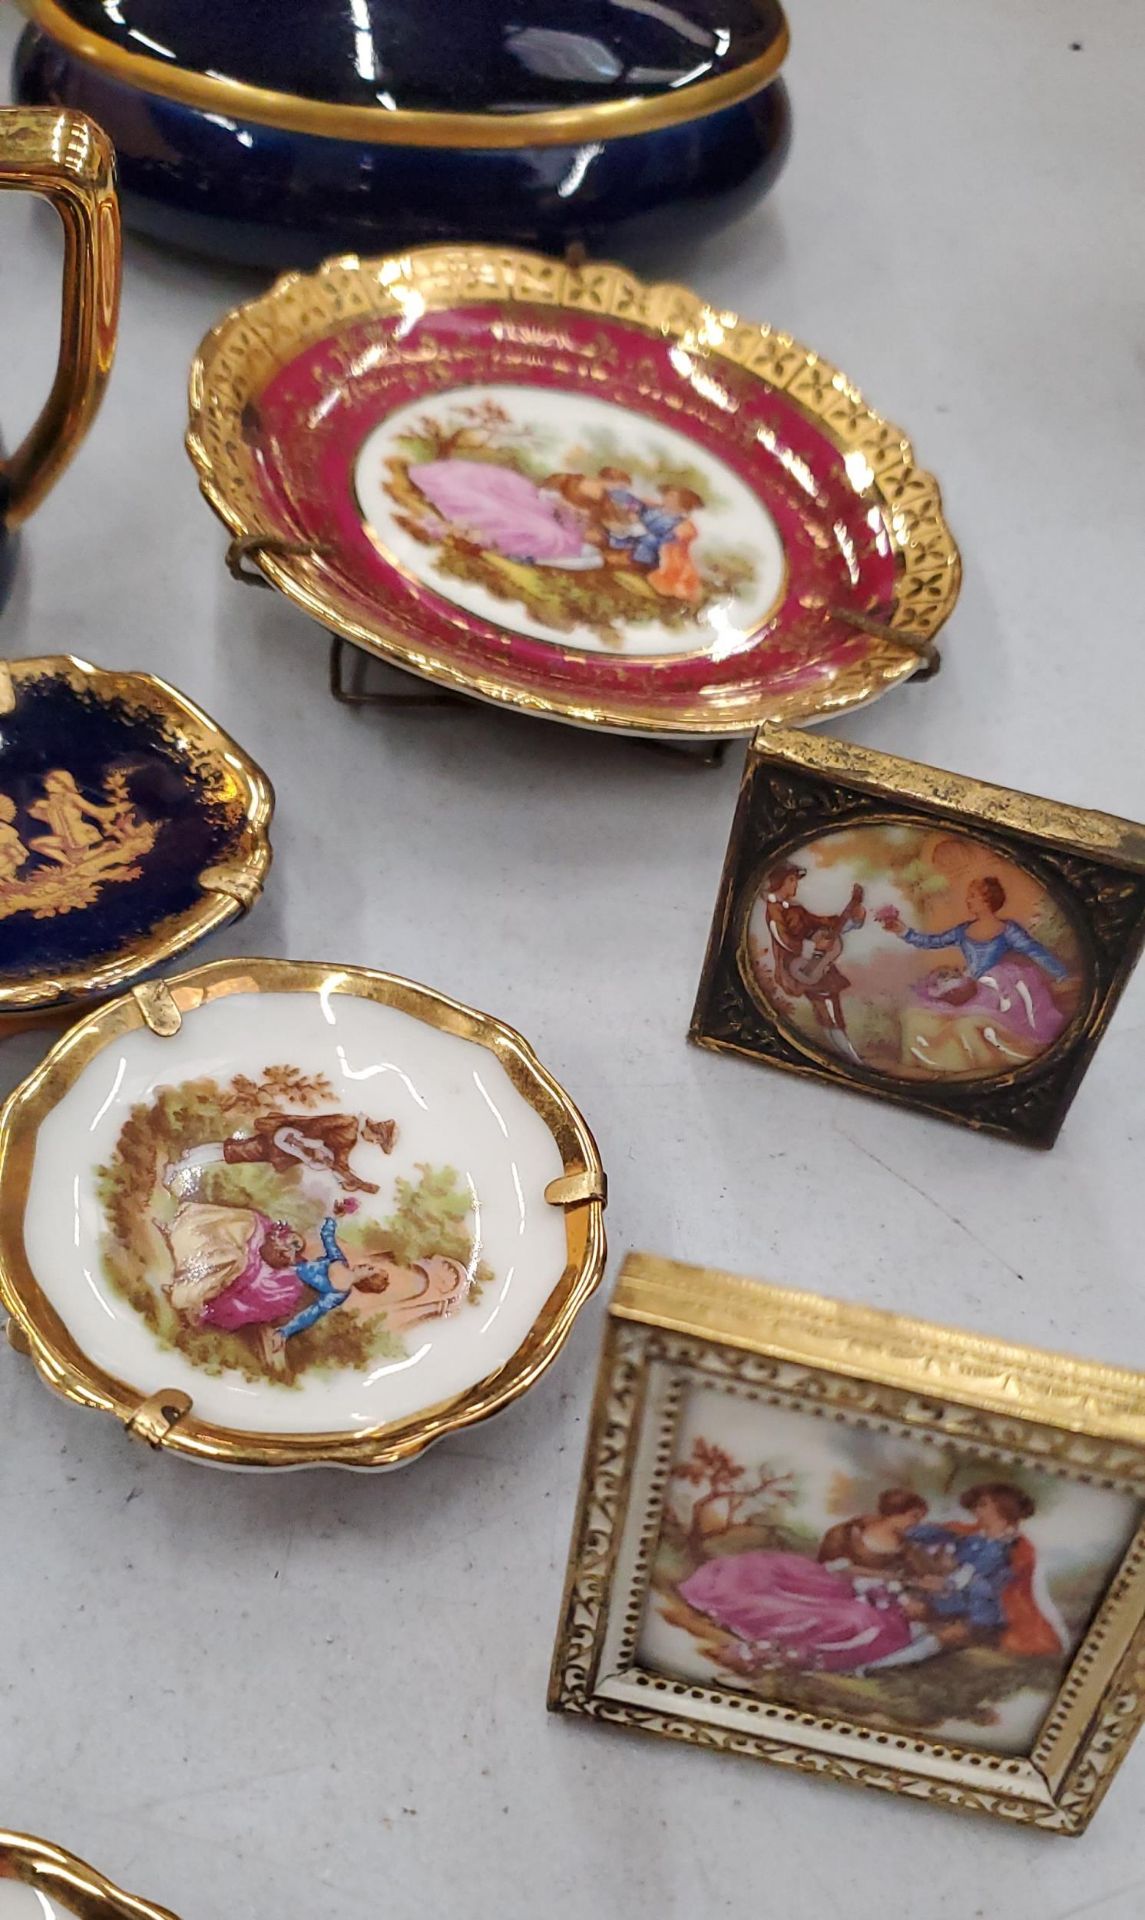 A COLLECTION OF MINIATURE LIMOGES TO INCLUDE TRINKET BOXES, PLATES, A TEAPOT, ETC PLUS A DRESDEN - Image 3 of 3